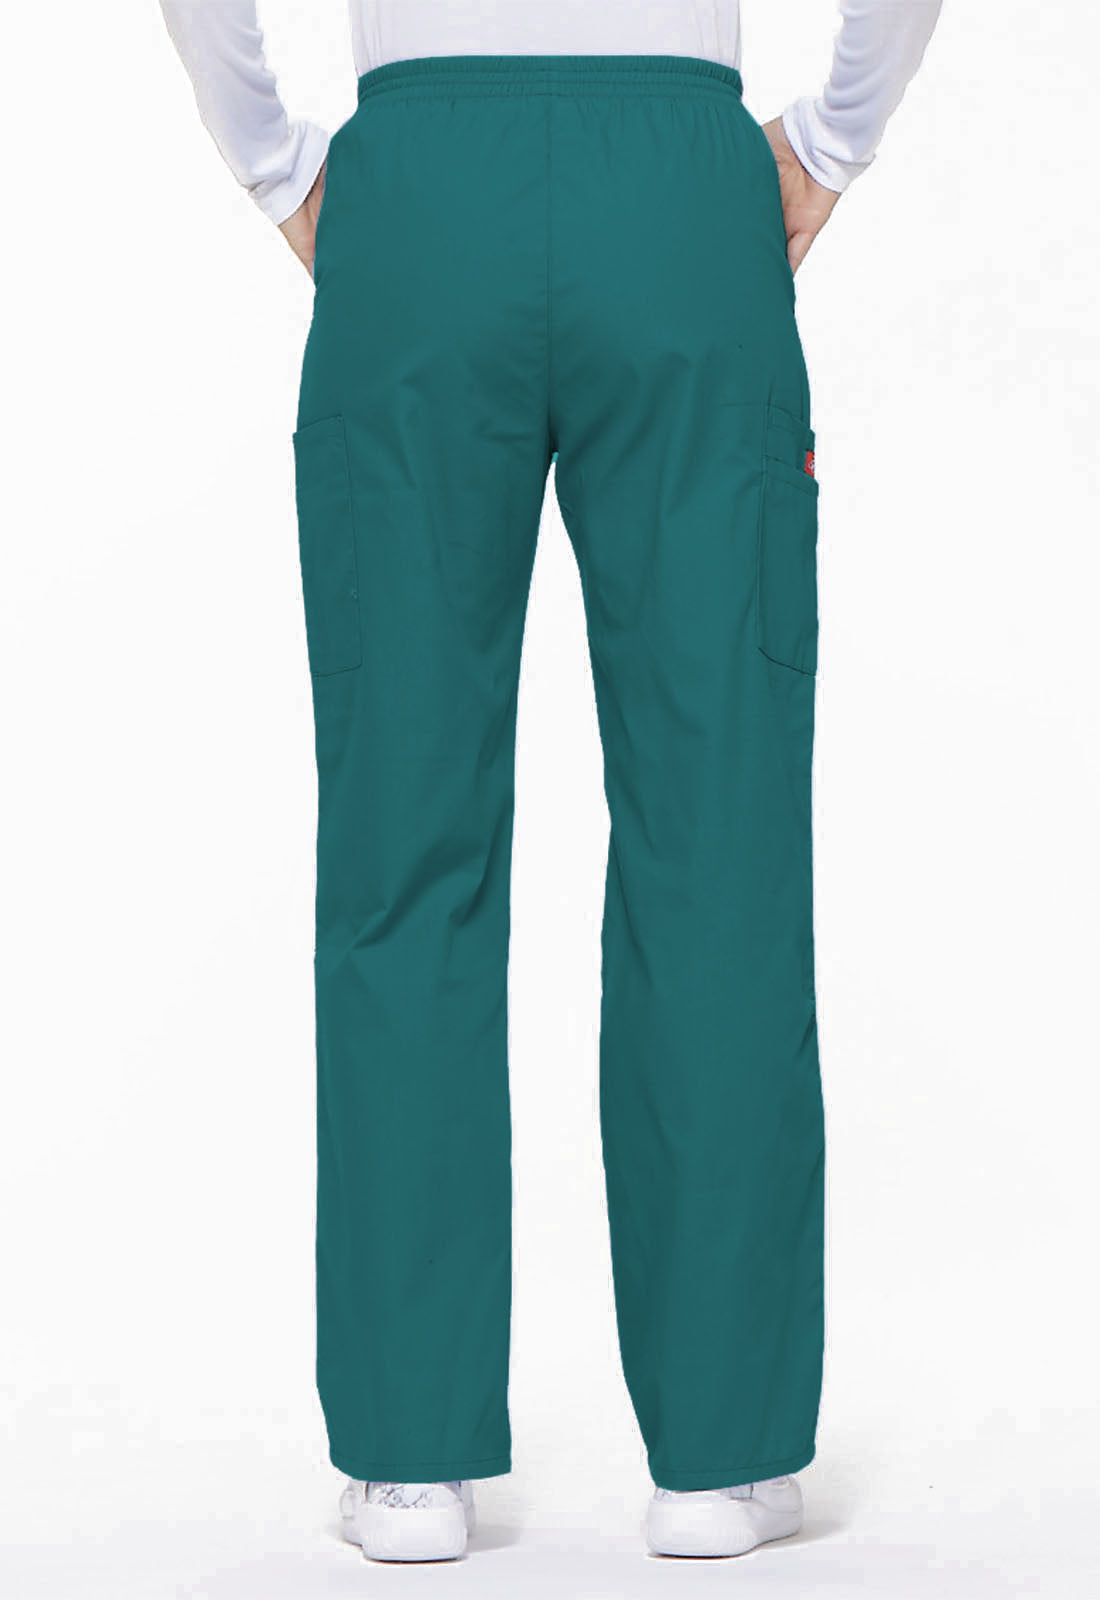 Exist. Conjunto Mujer Dickies EDS Signature Mod.86806/86106 Teal